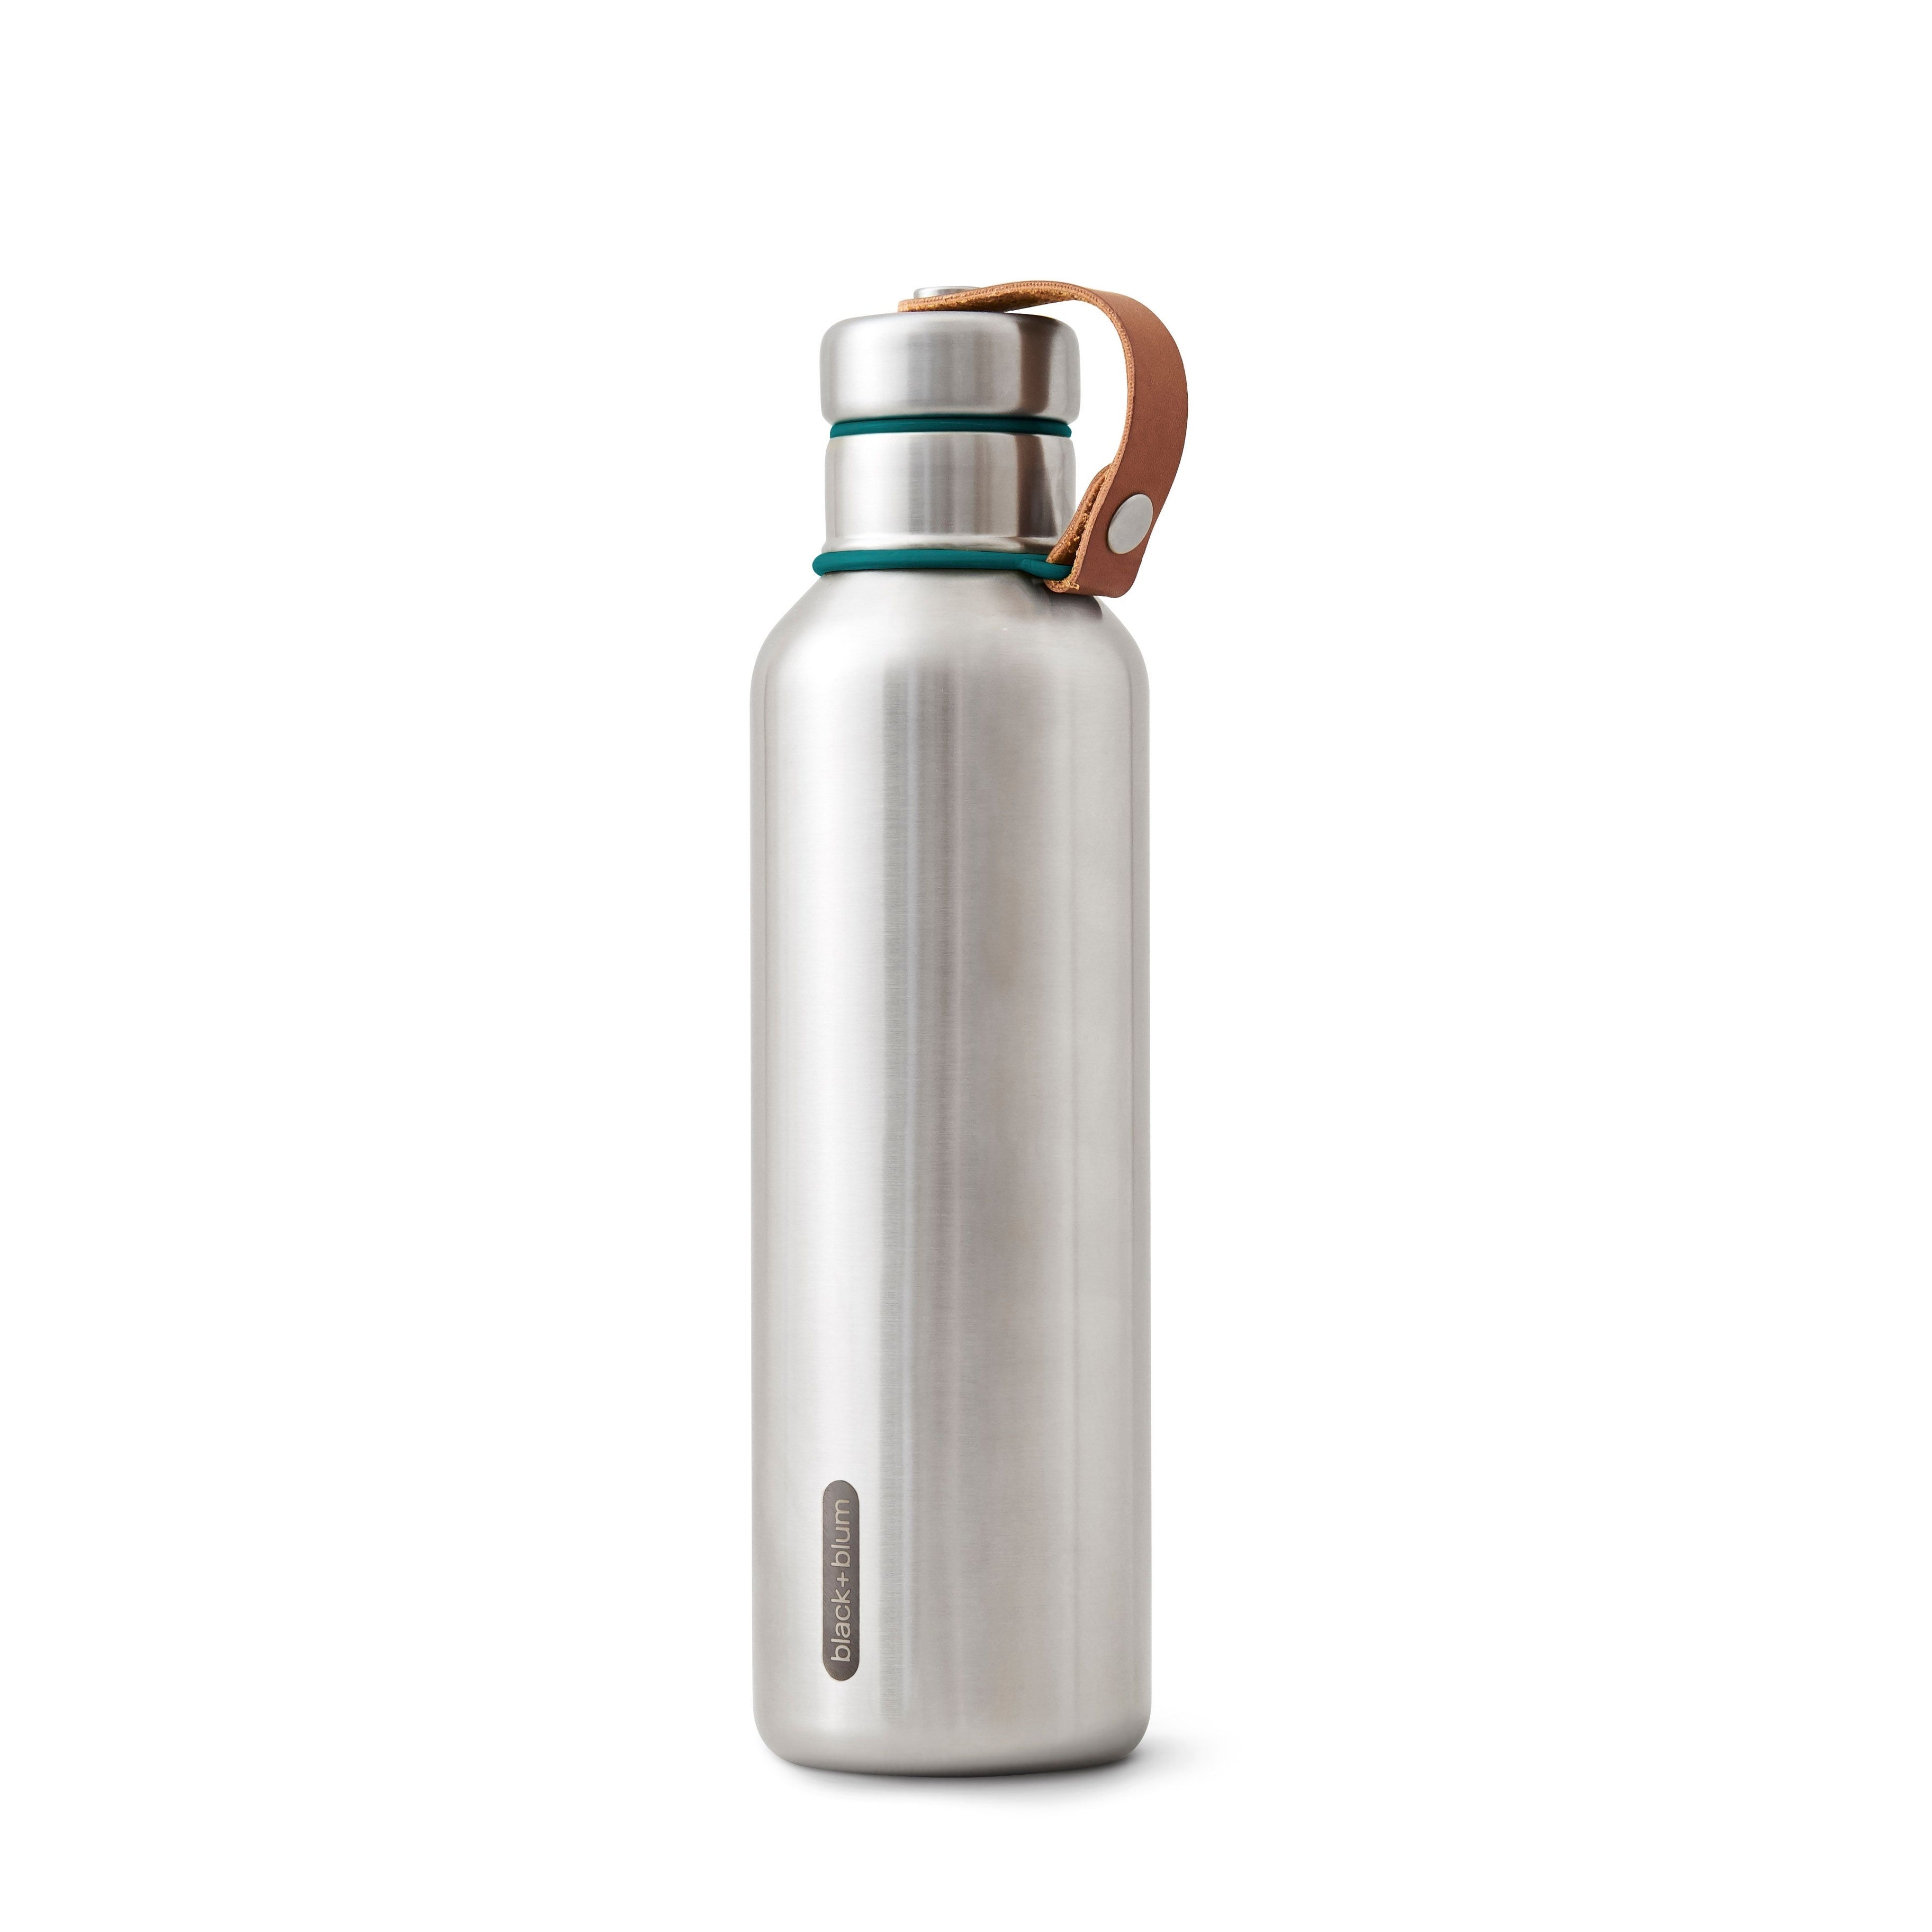 https://cdn.shopify.com/s/files/1/0319/4342/6187/products/black-blum-stainless-steel-insulated-water-bottle-with-leather-strap-25oz-ocean-p0111s-59867813-37148935389398.jpg?v=1648475092&width=3650